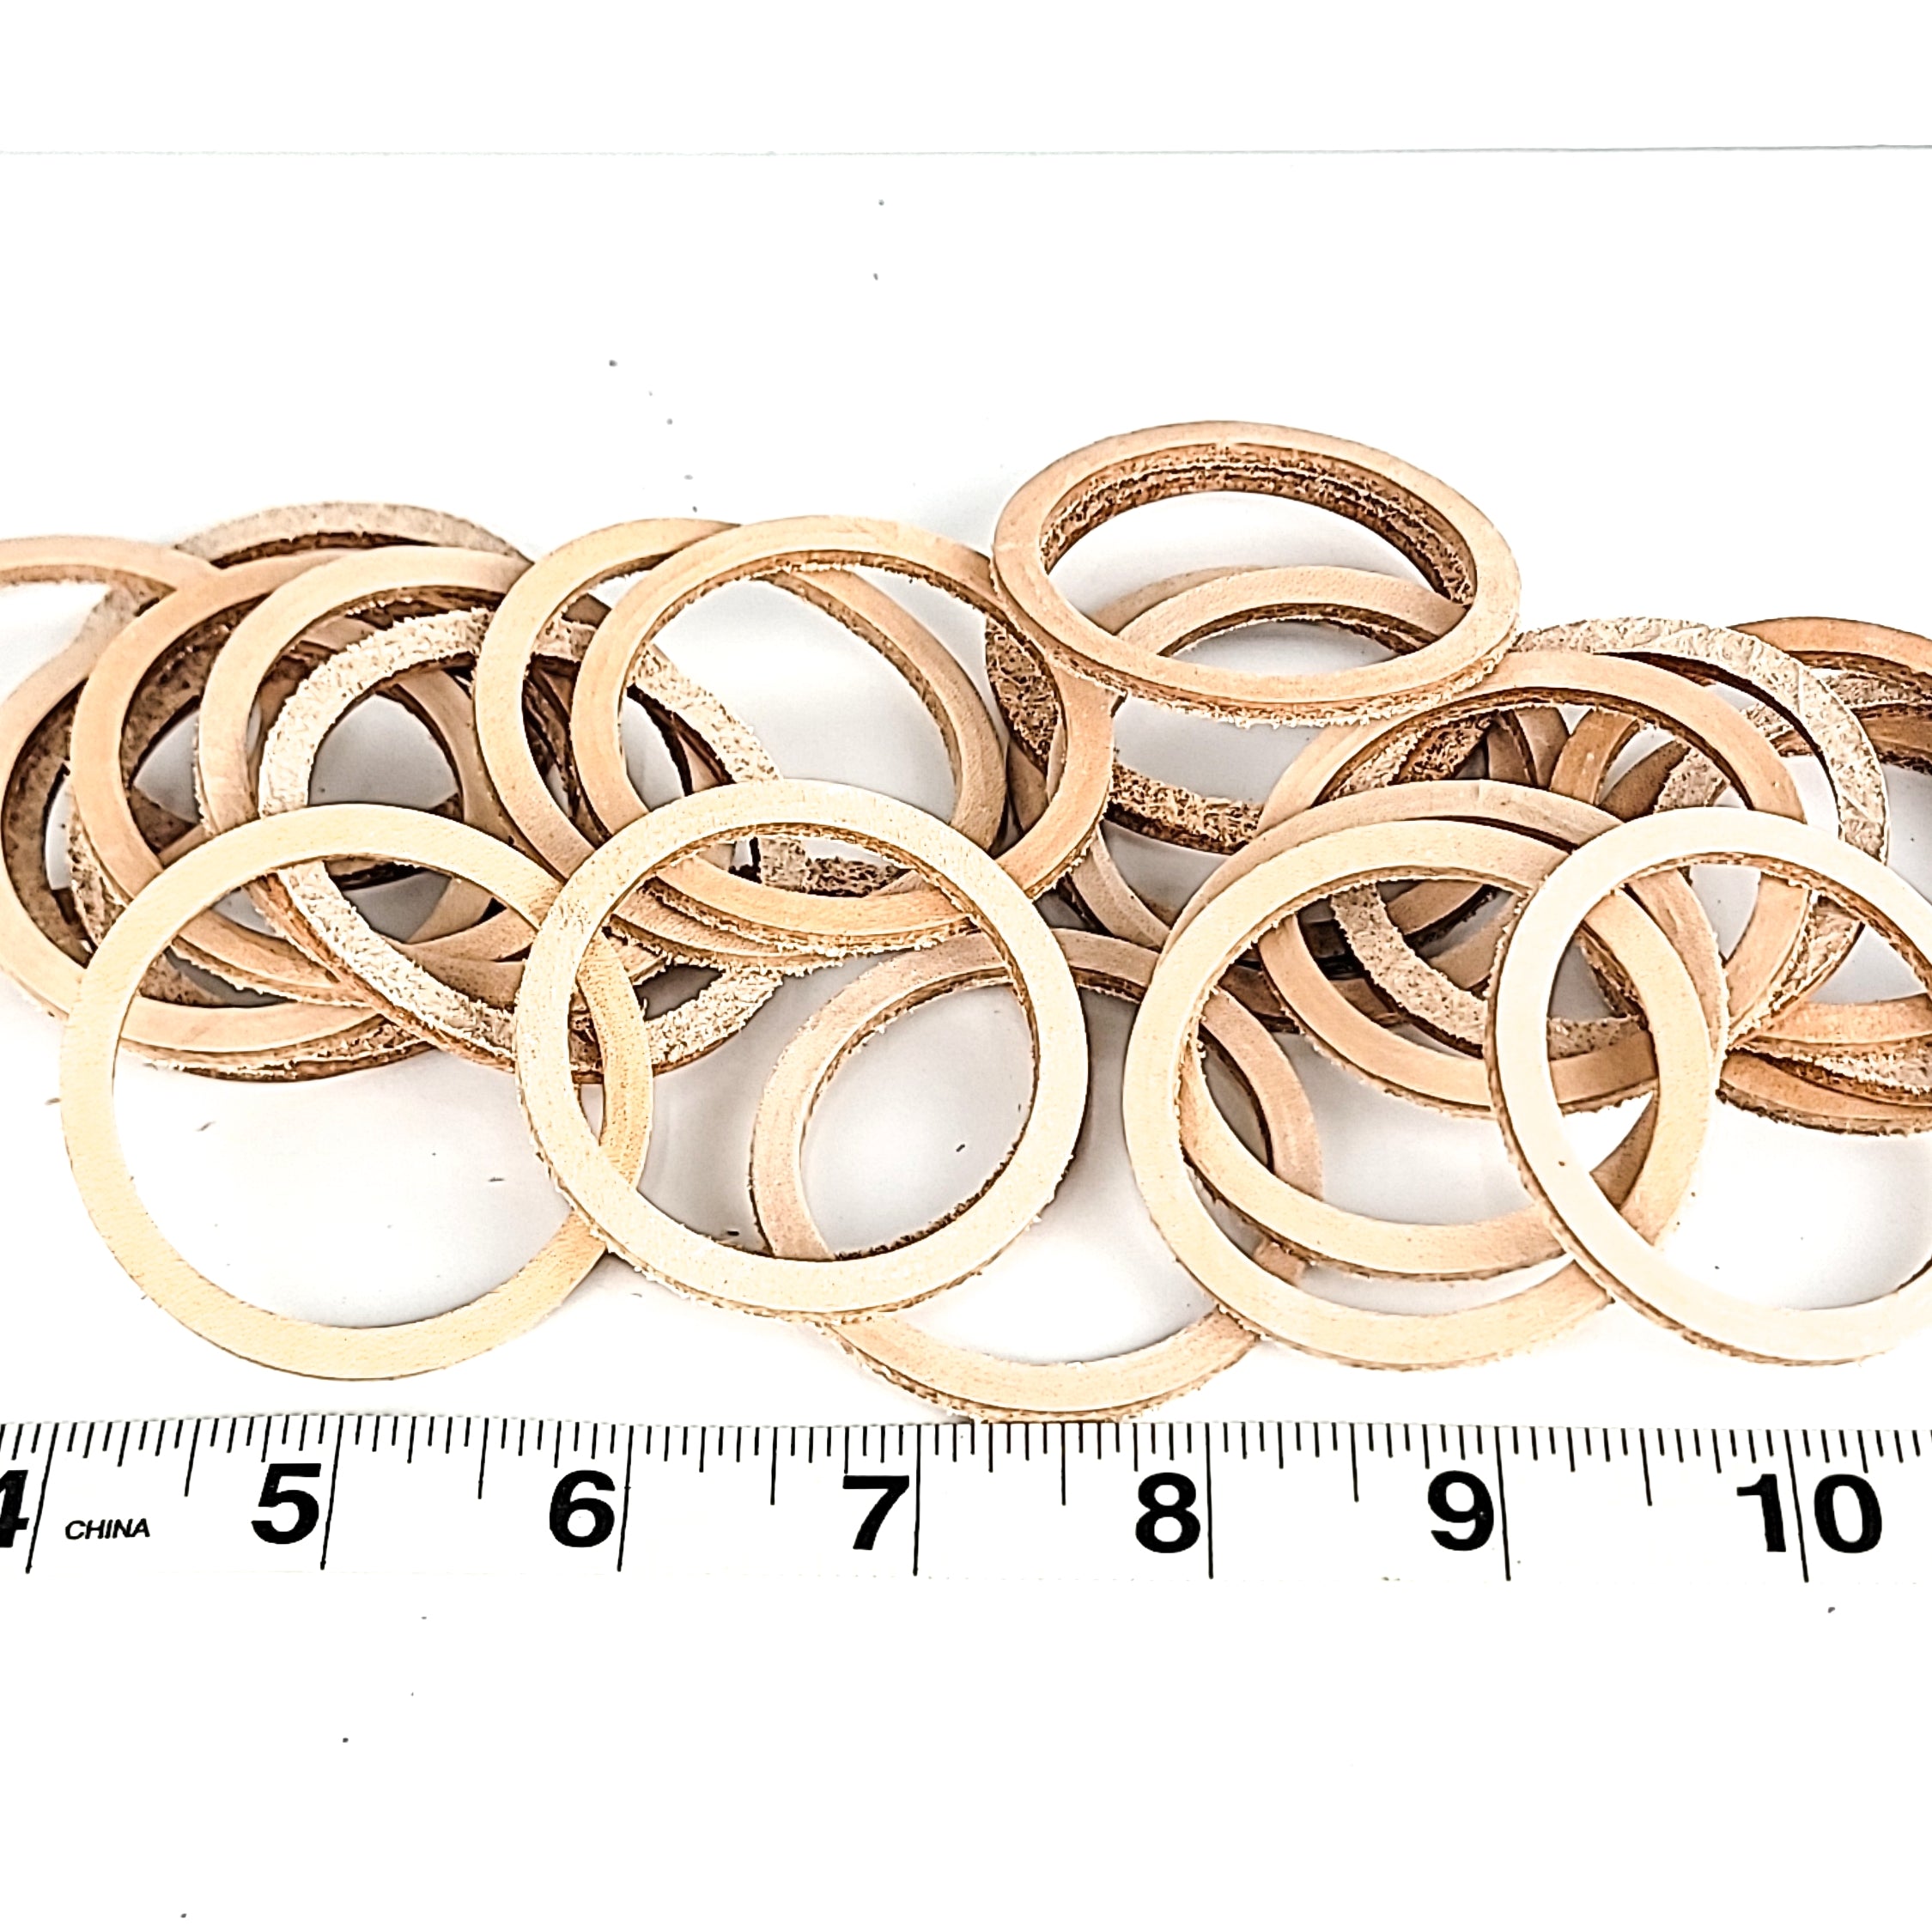 Skinny Leather Washers - 10 Pack